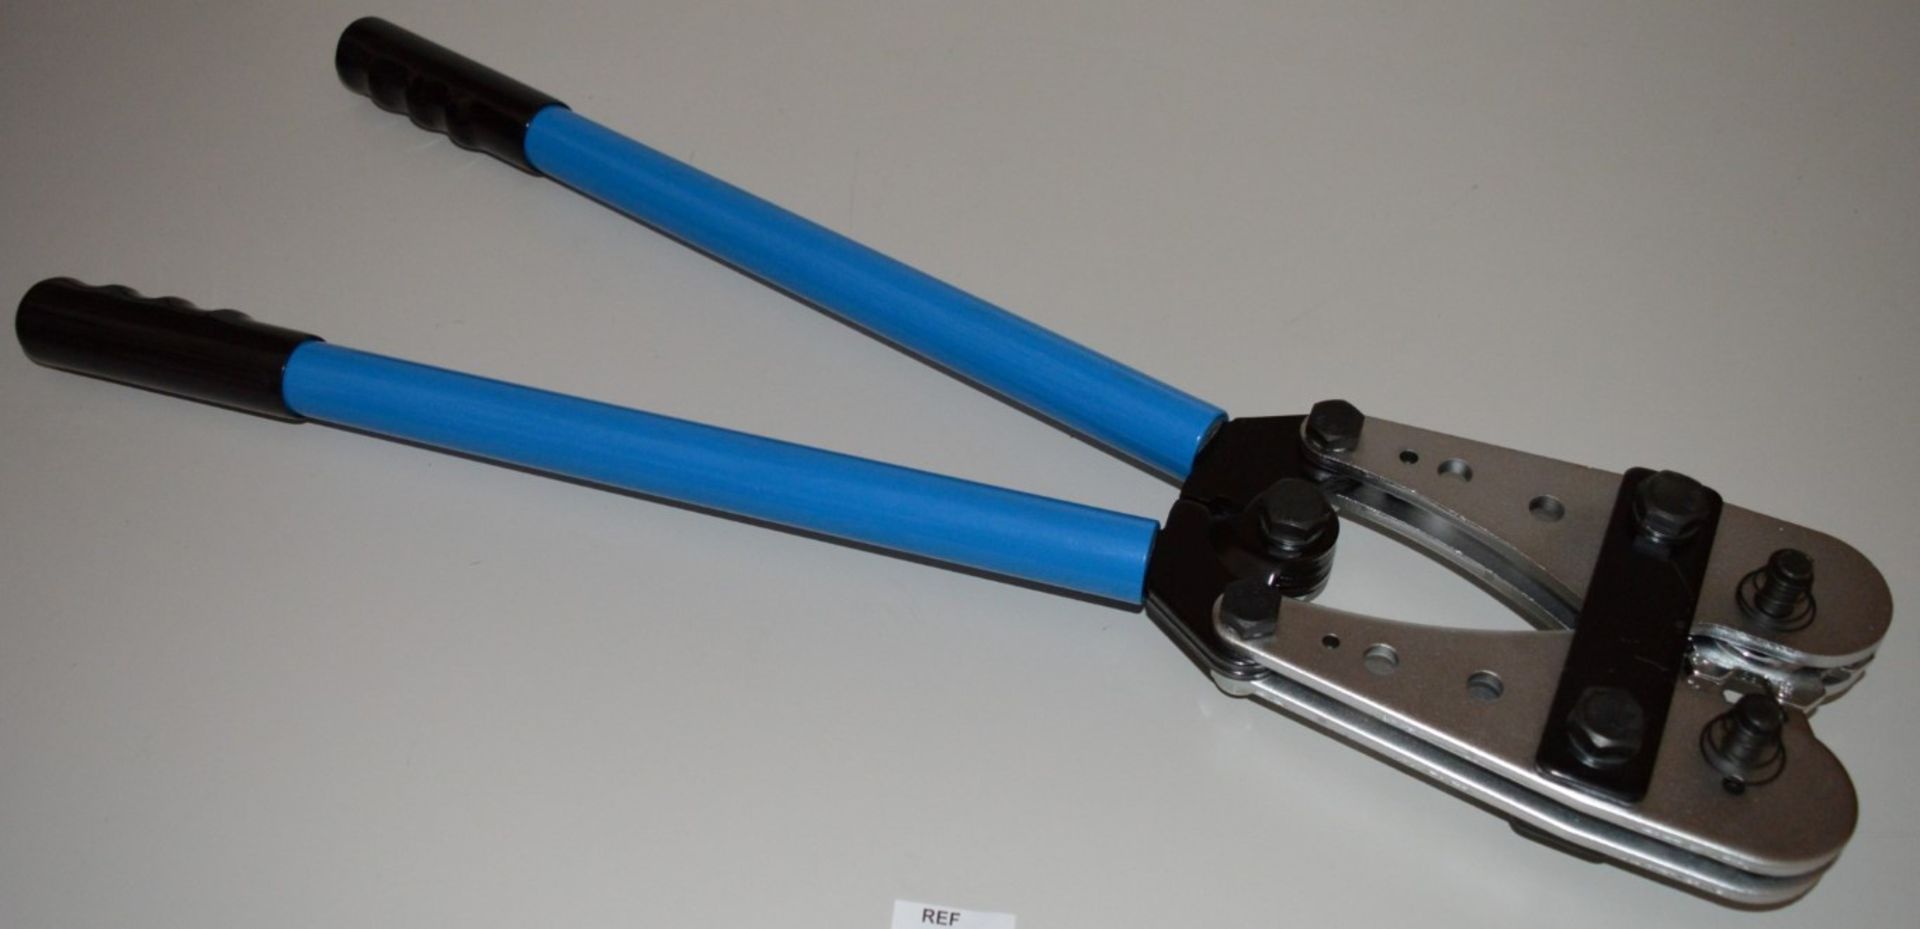 1 x HD Copper Tube Terminal Crimp Tool With Adjustable Hex - 62cm Length - XXX Branded - New and - Image 4 of 7